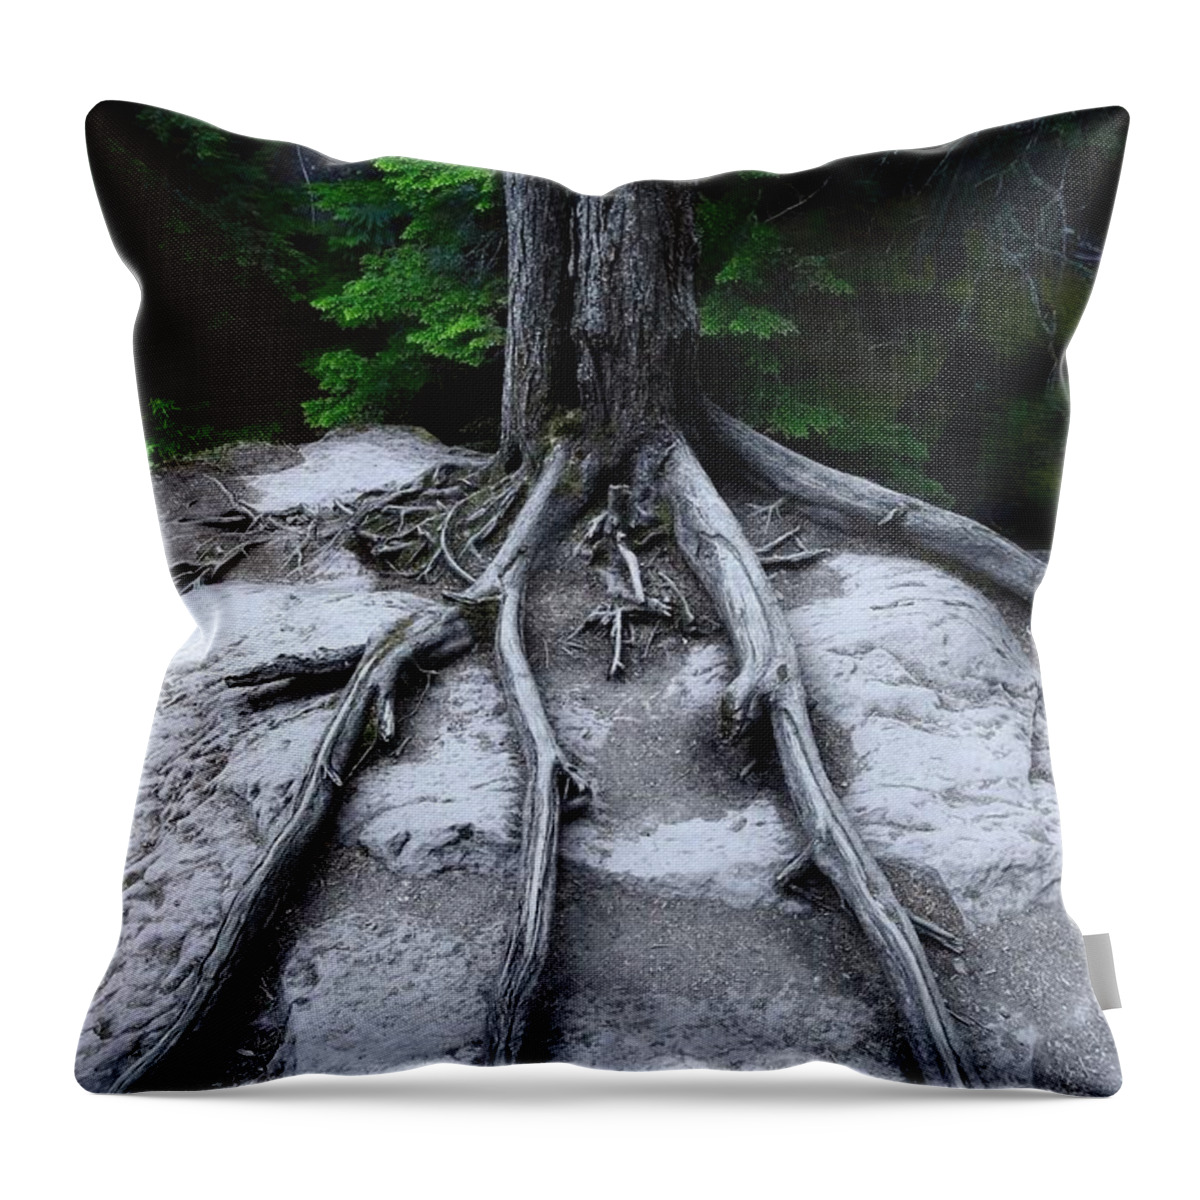 Avalanche Creek Throw Pillow featuring the photograph Bones by David Andersen